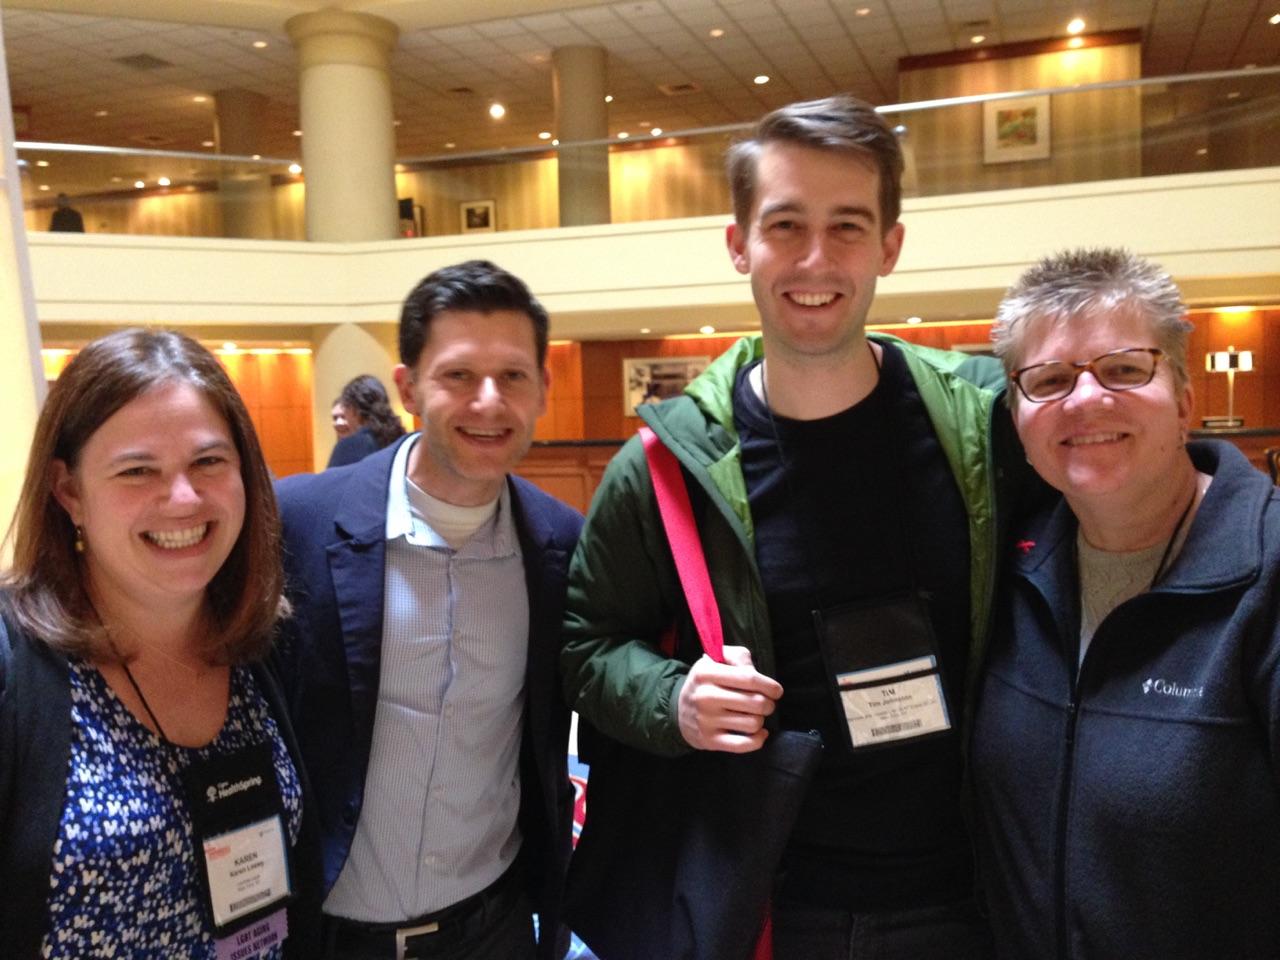 Members of the SAGE team at last year's Aging in America Conference. (photo: Ben de Guzman)